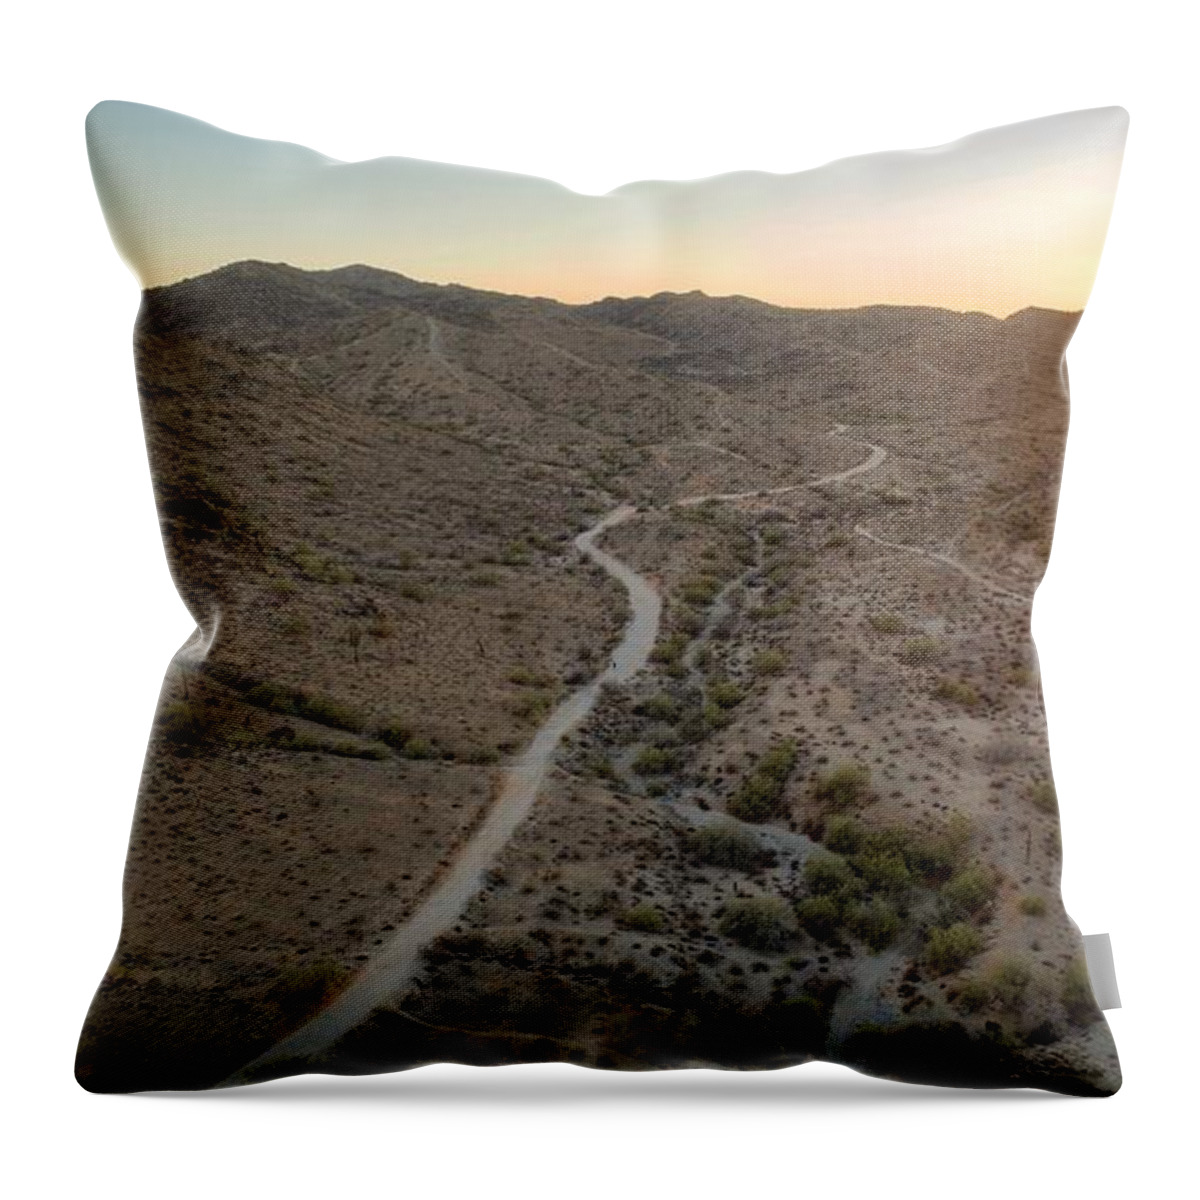 South Mountain Throw Pillow featuring the photograph South Mountain Canyon by Anthony Giammarino